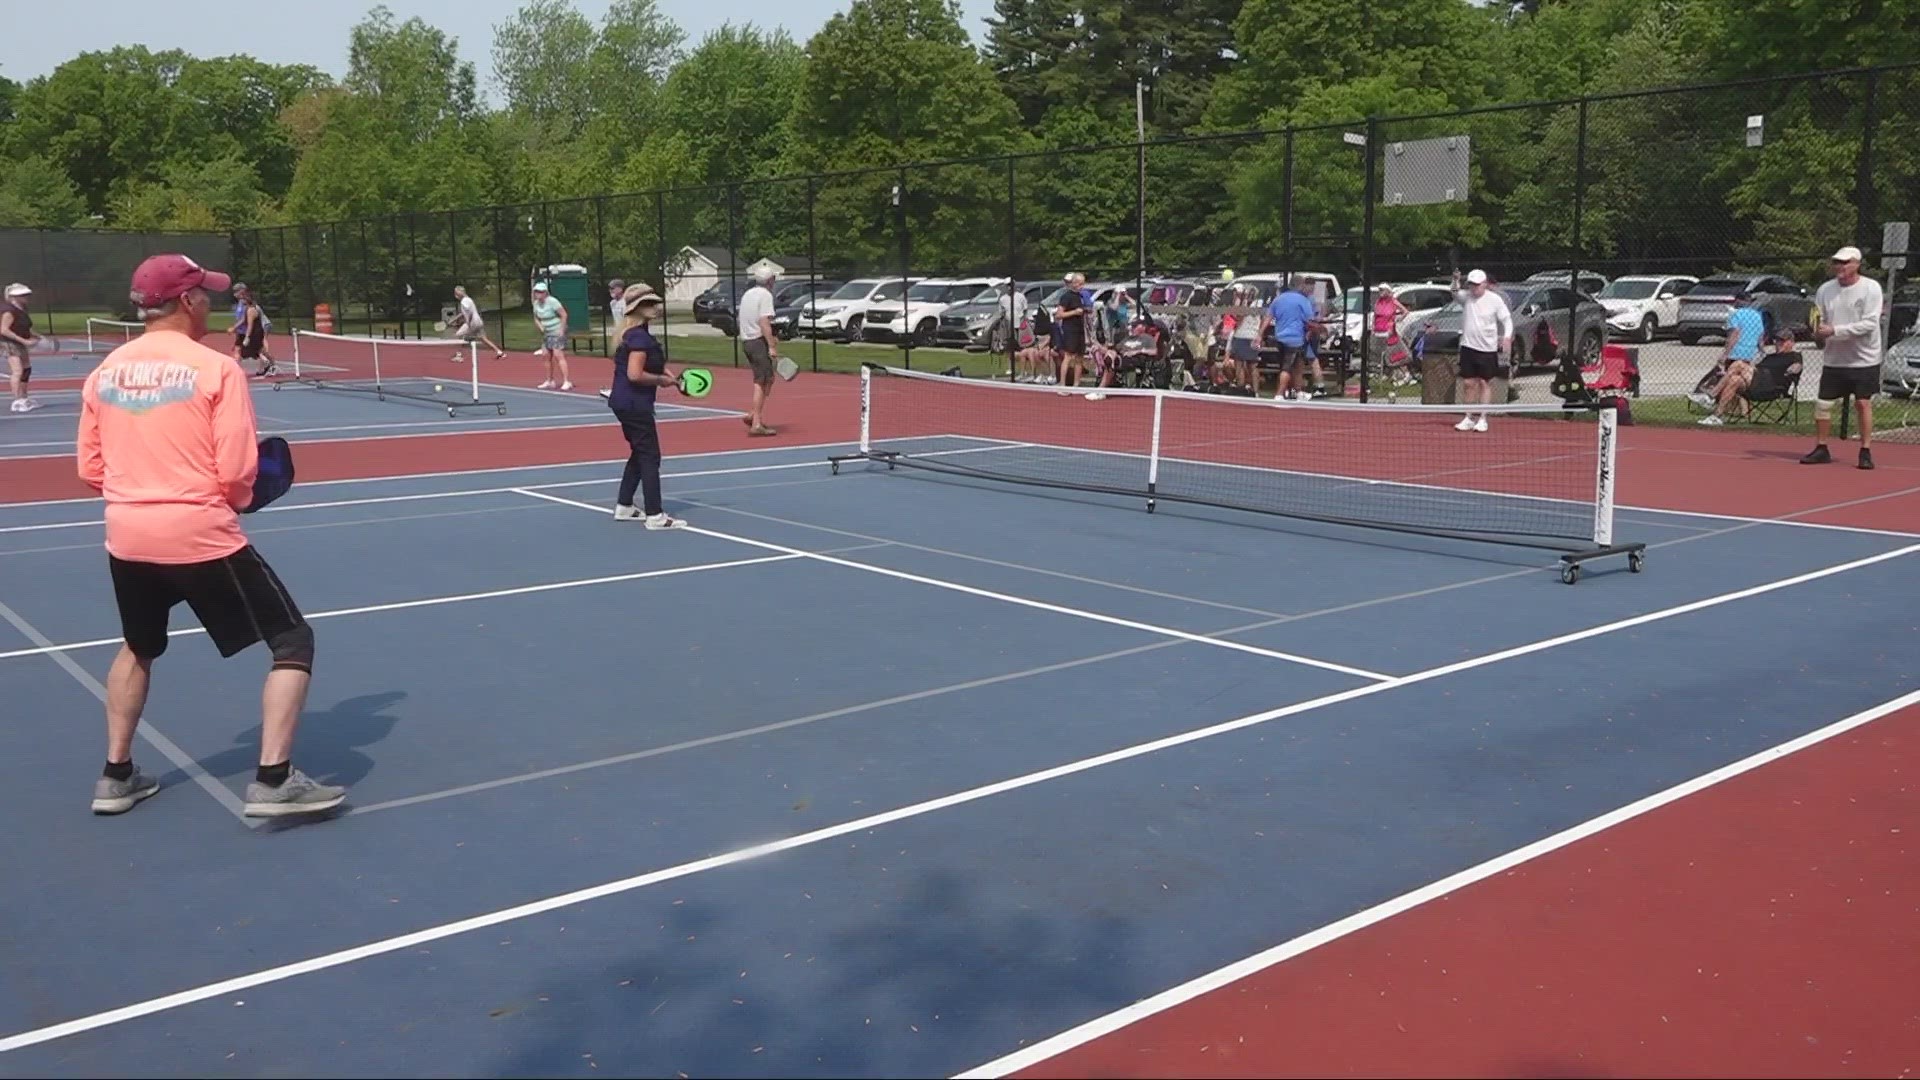 Parks across the area are undergoing construction of courts to try to keep up with the fastest growing sport in the United States.